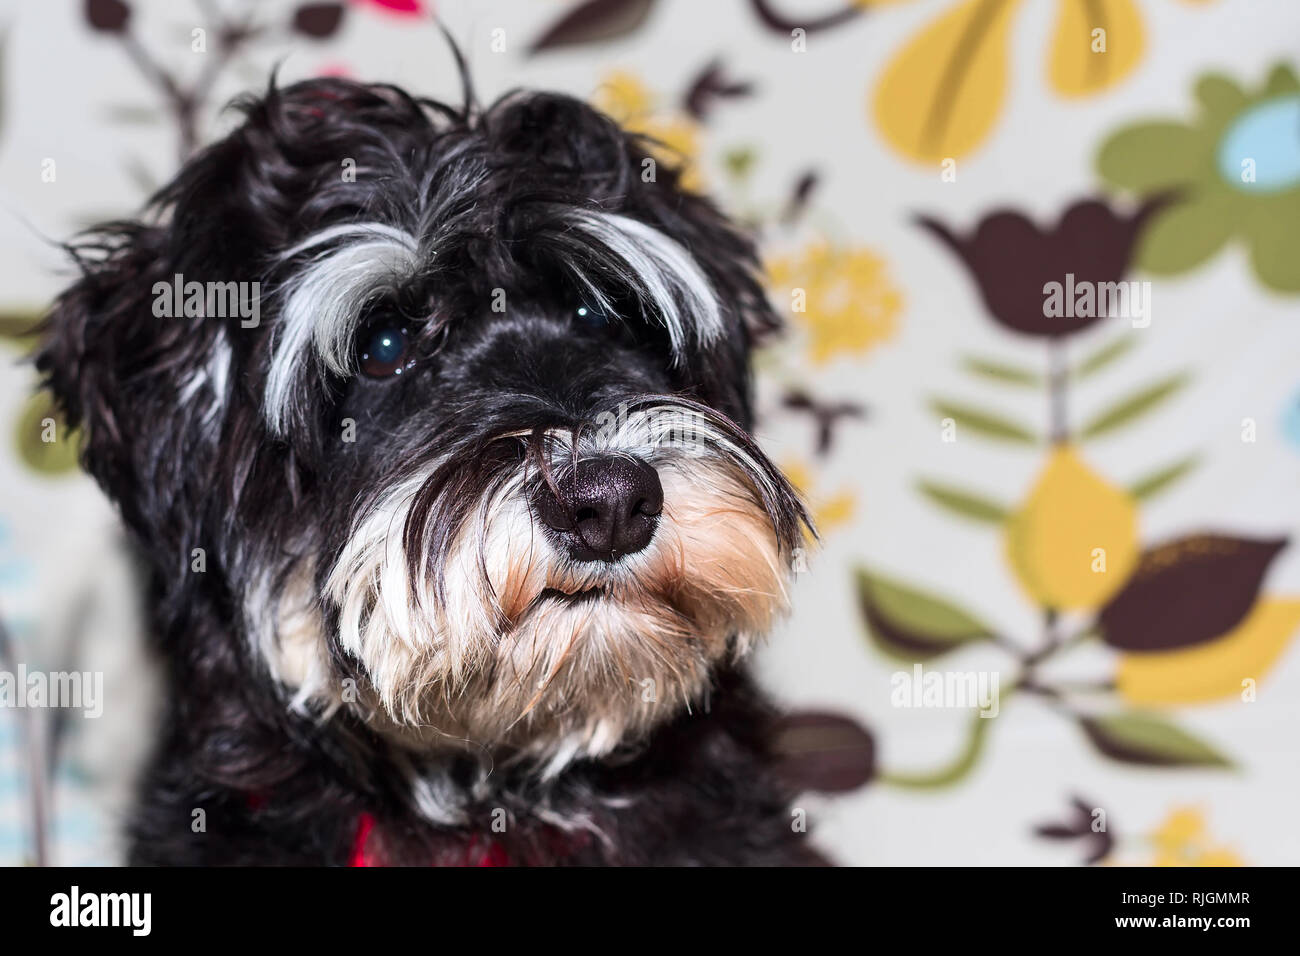 Miniature schnauzer cute young black and silver puppy portrait close-up Stock Photo